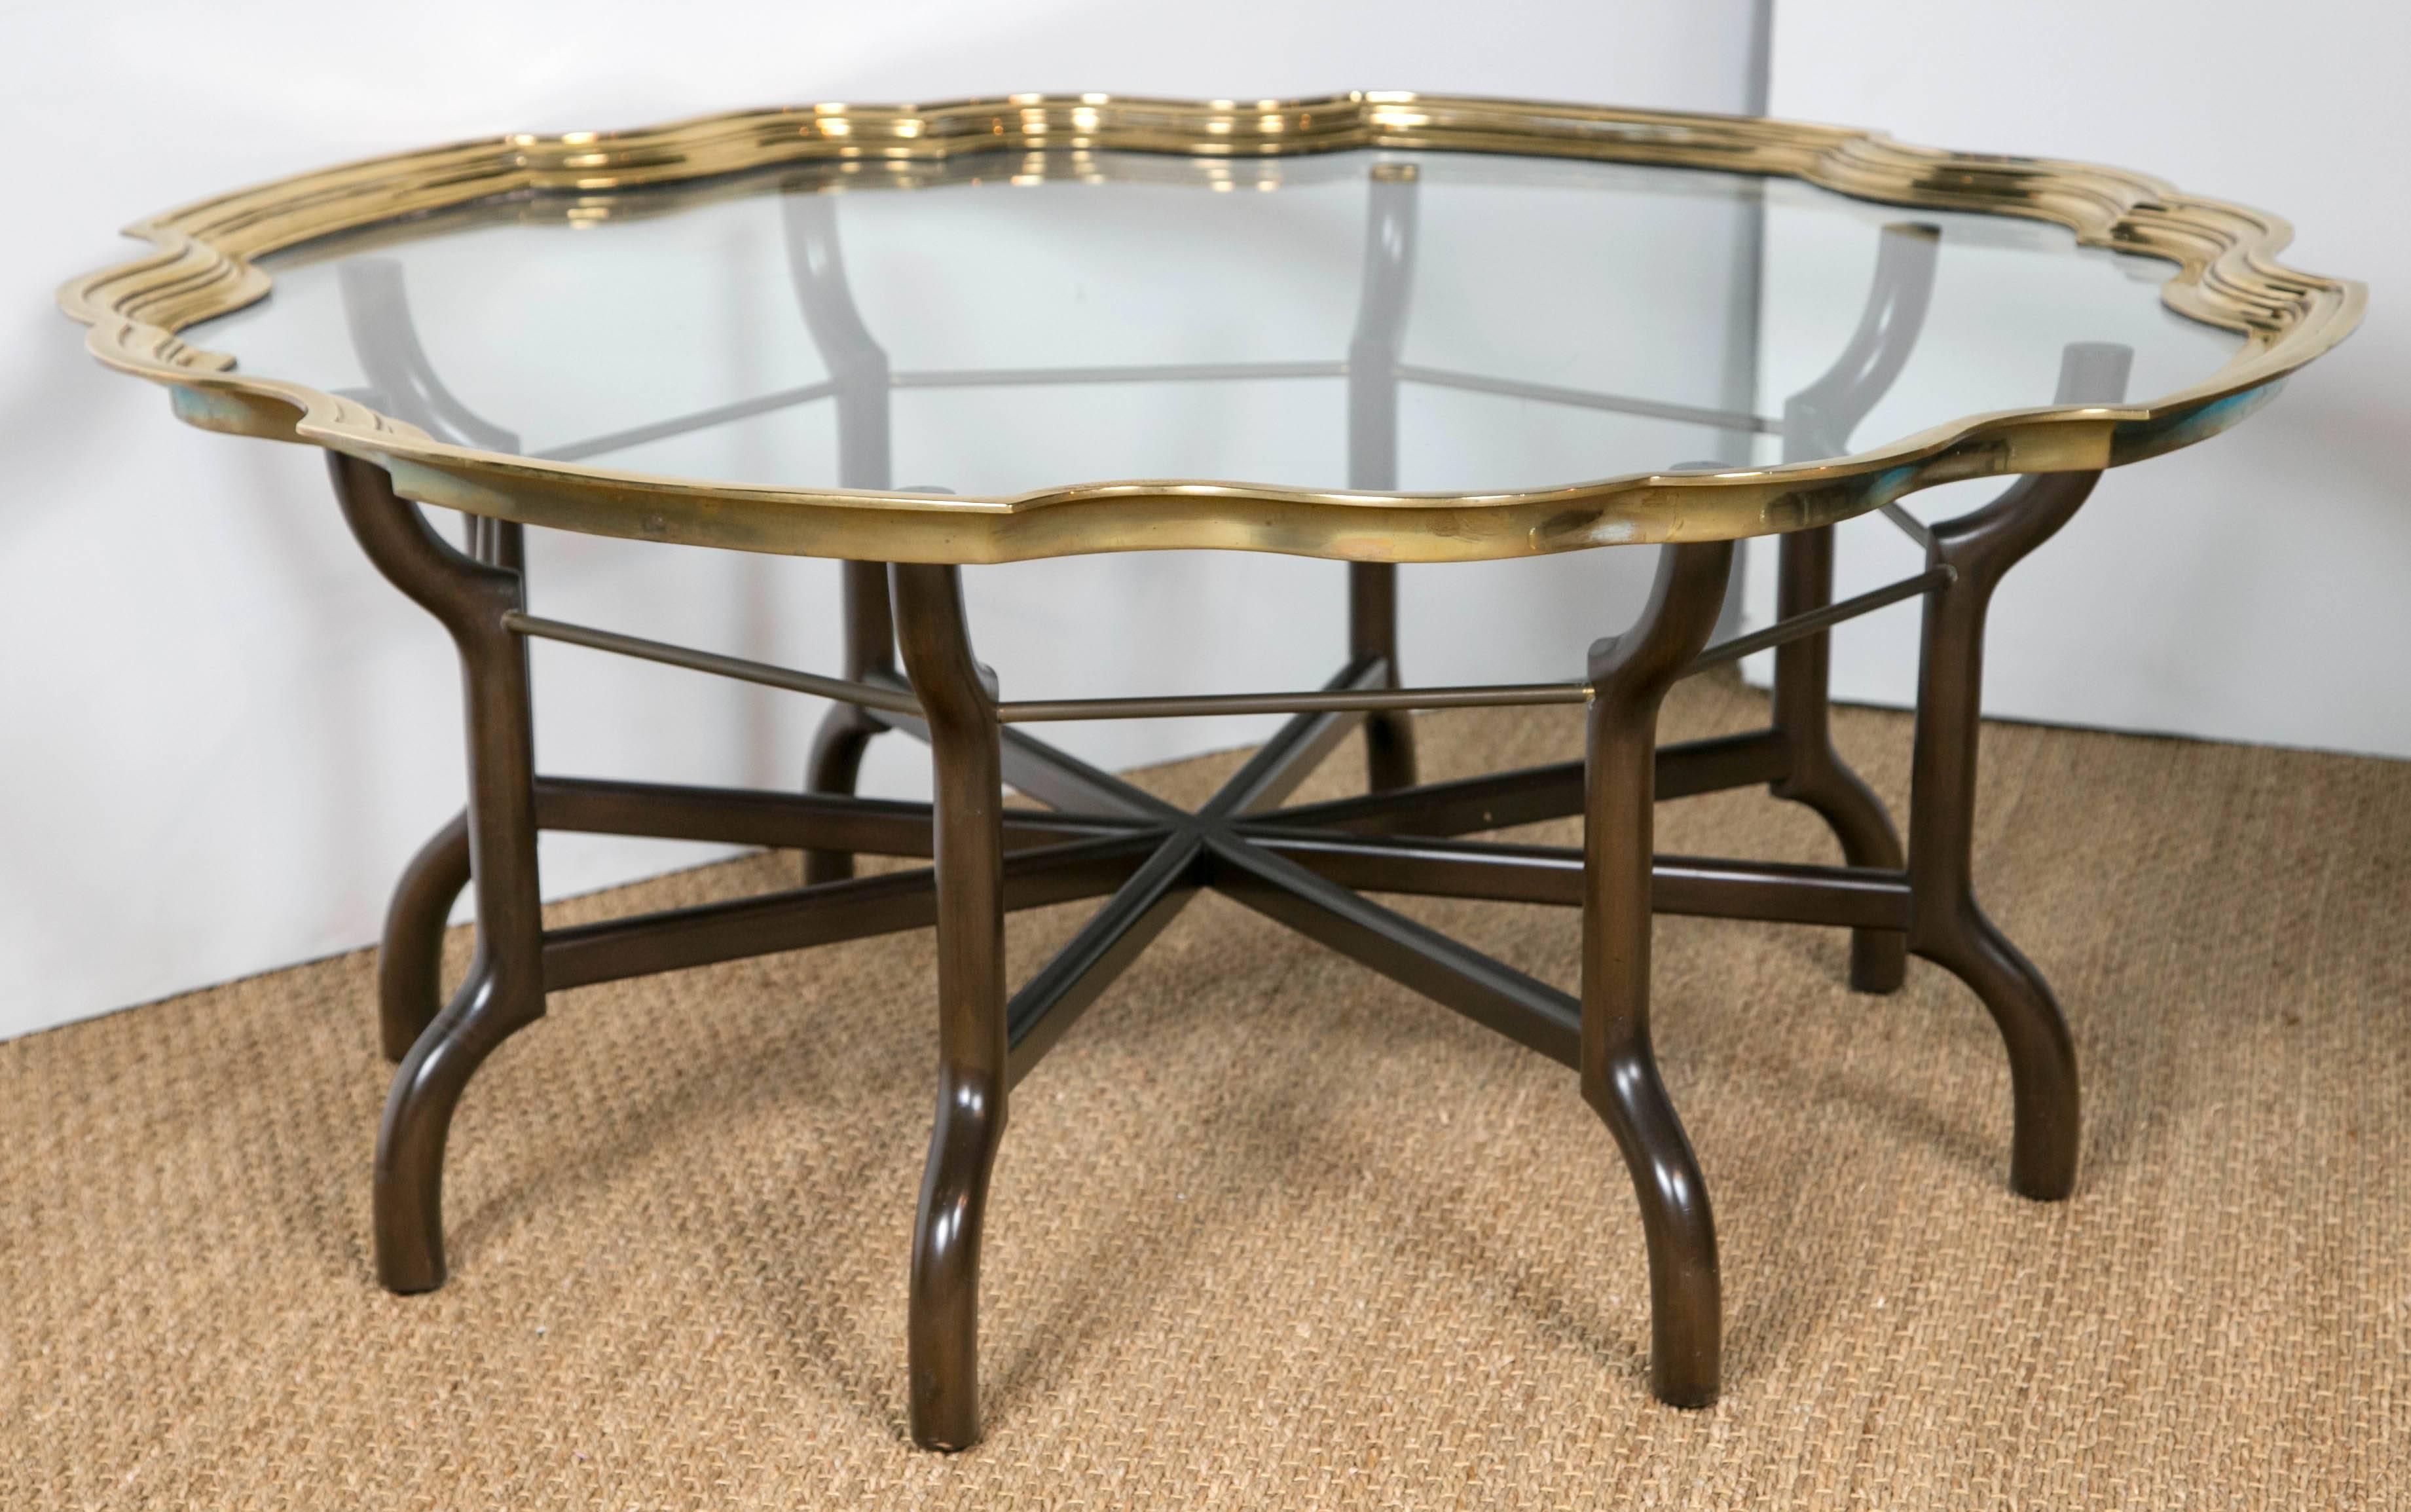 Brass and glass scalloped edge round coffee table, Mid-Century.